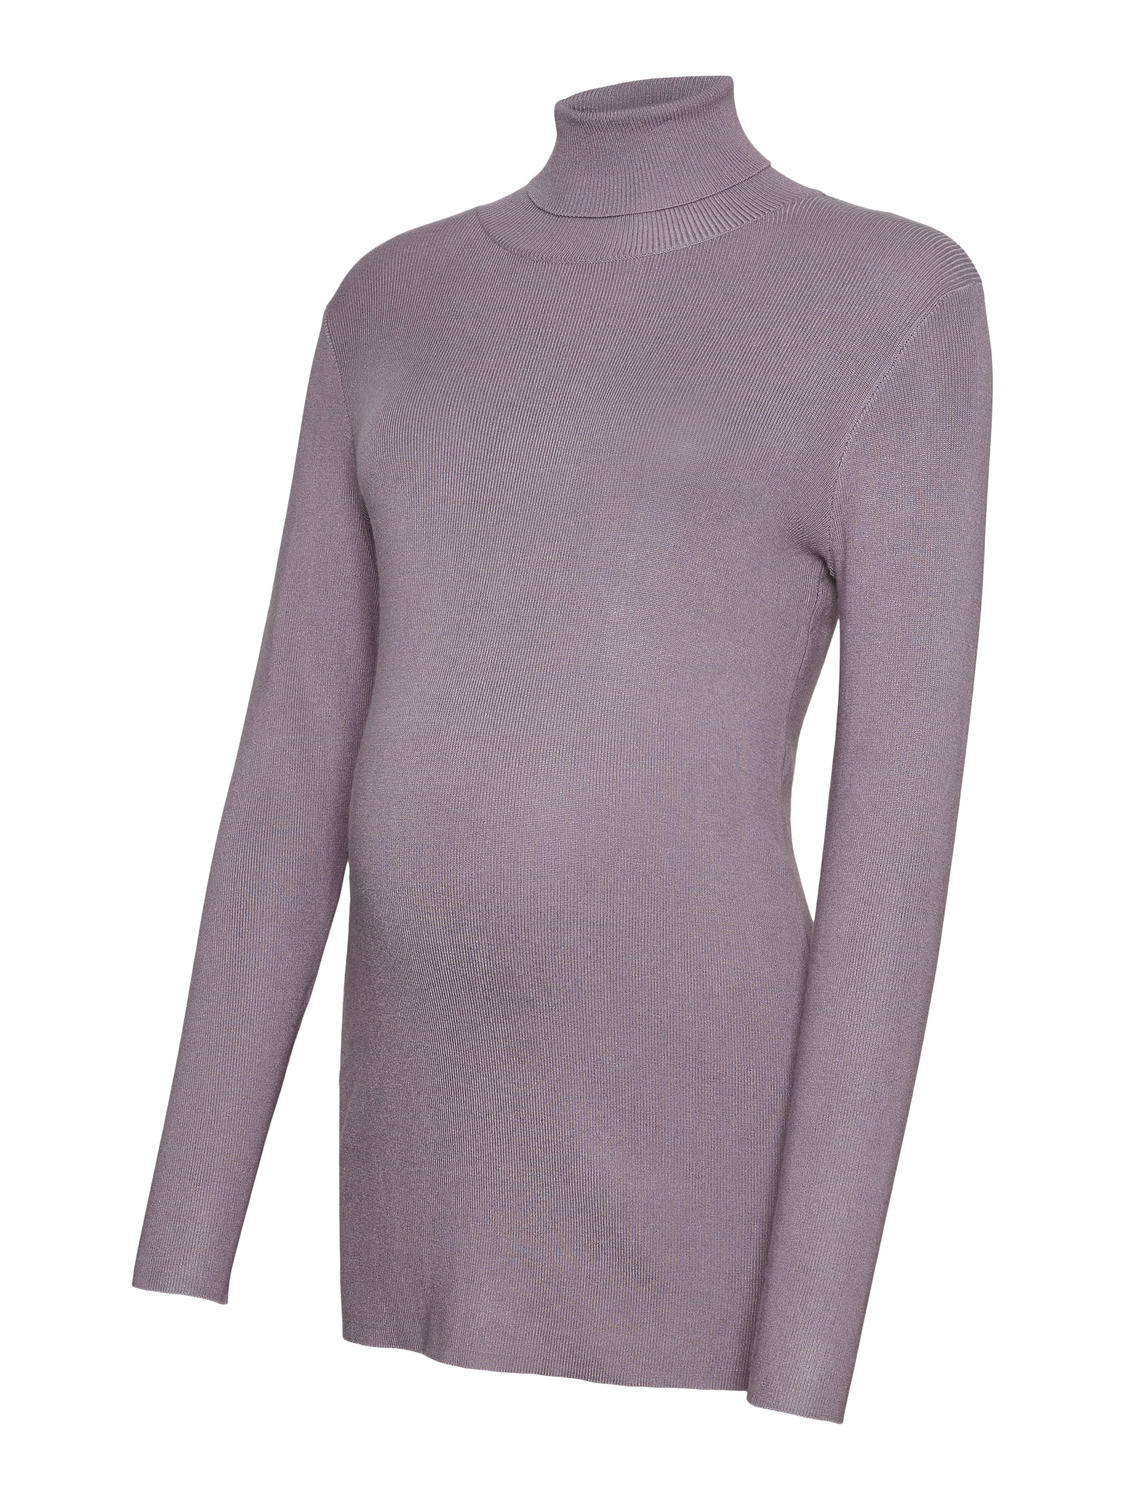 MAMA.LICIOUS Knitted maternity-pullover -Purple Ash - 20013064